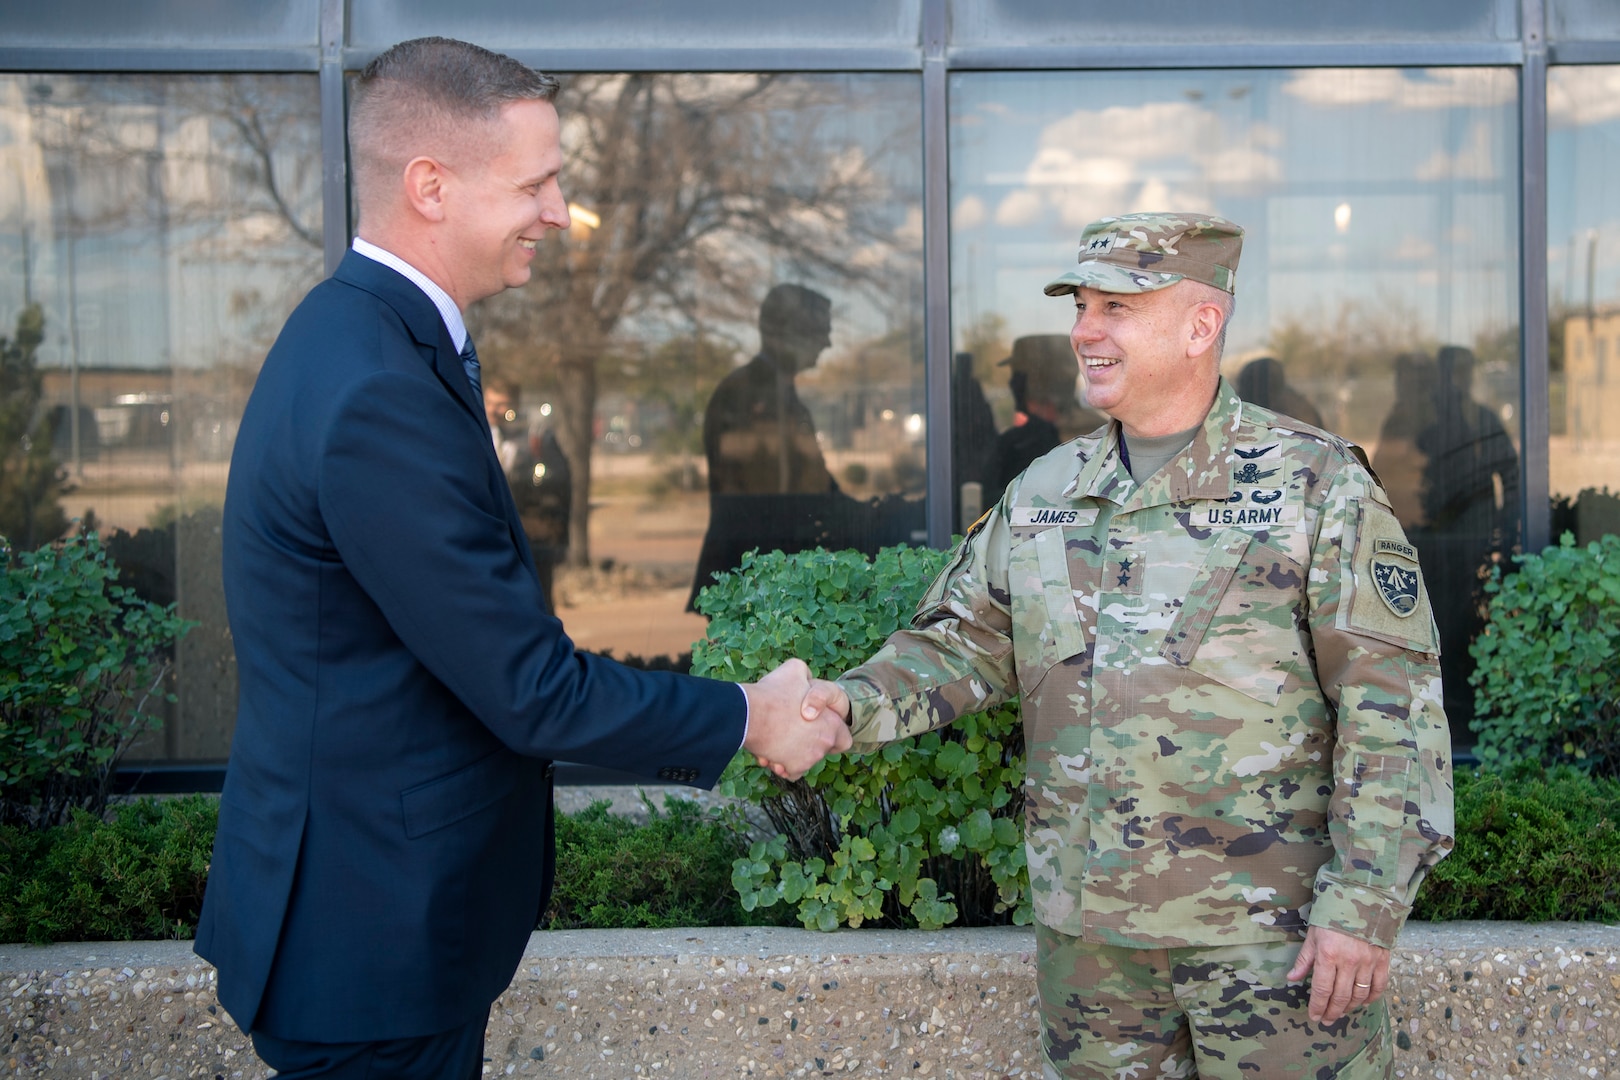 Man in suit shakes hands with man in Army uniform